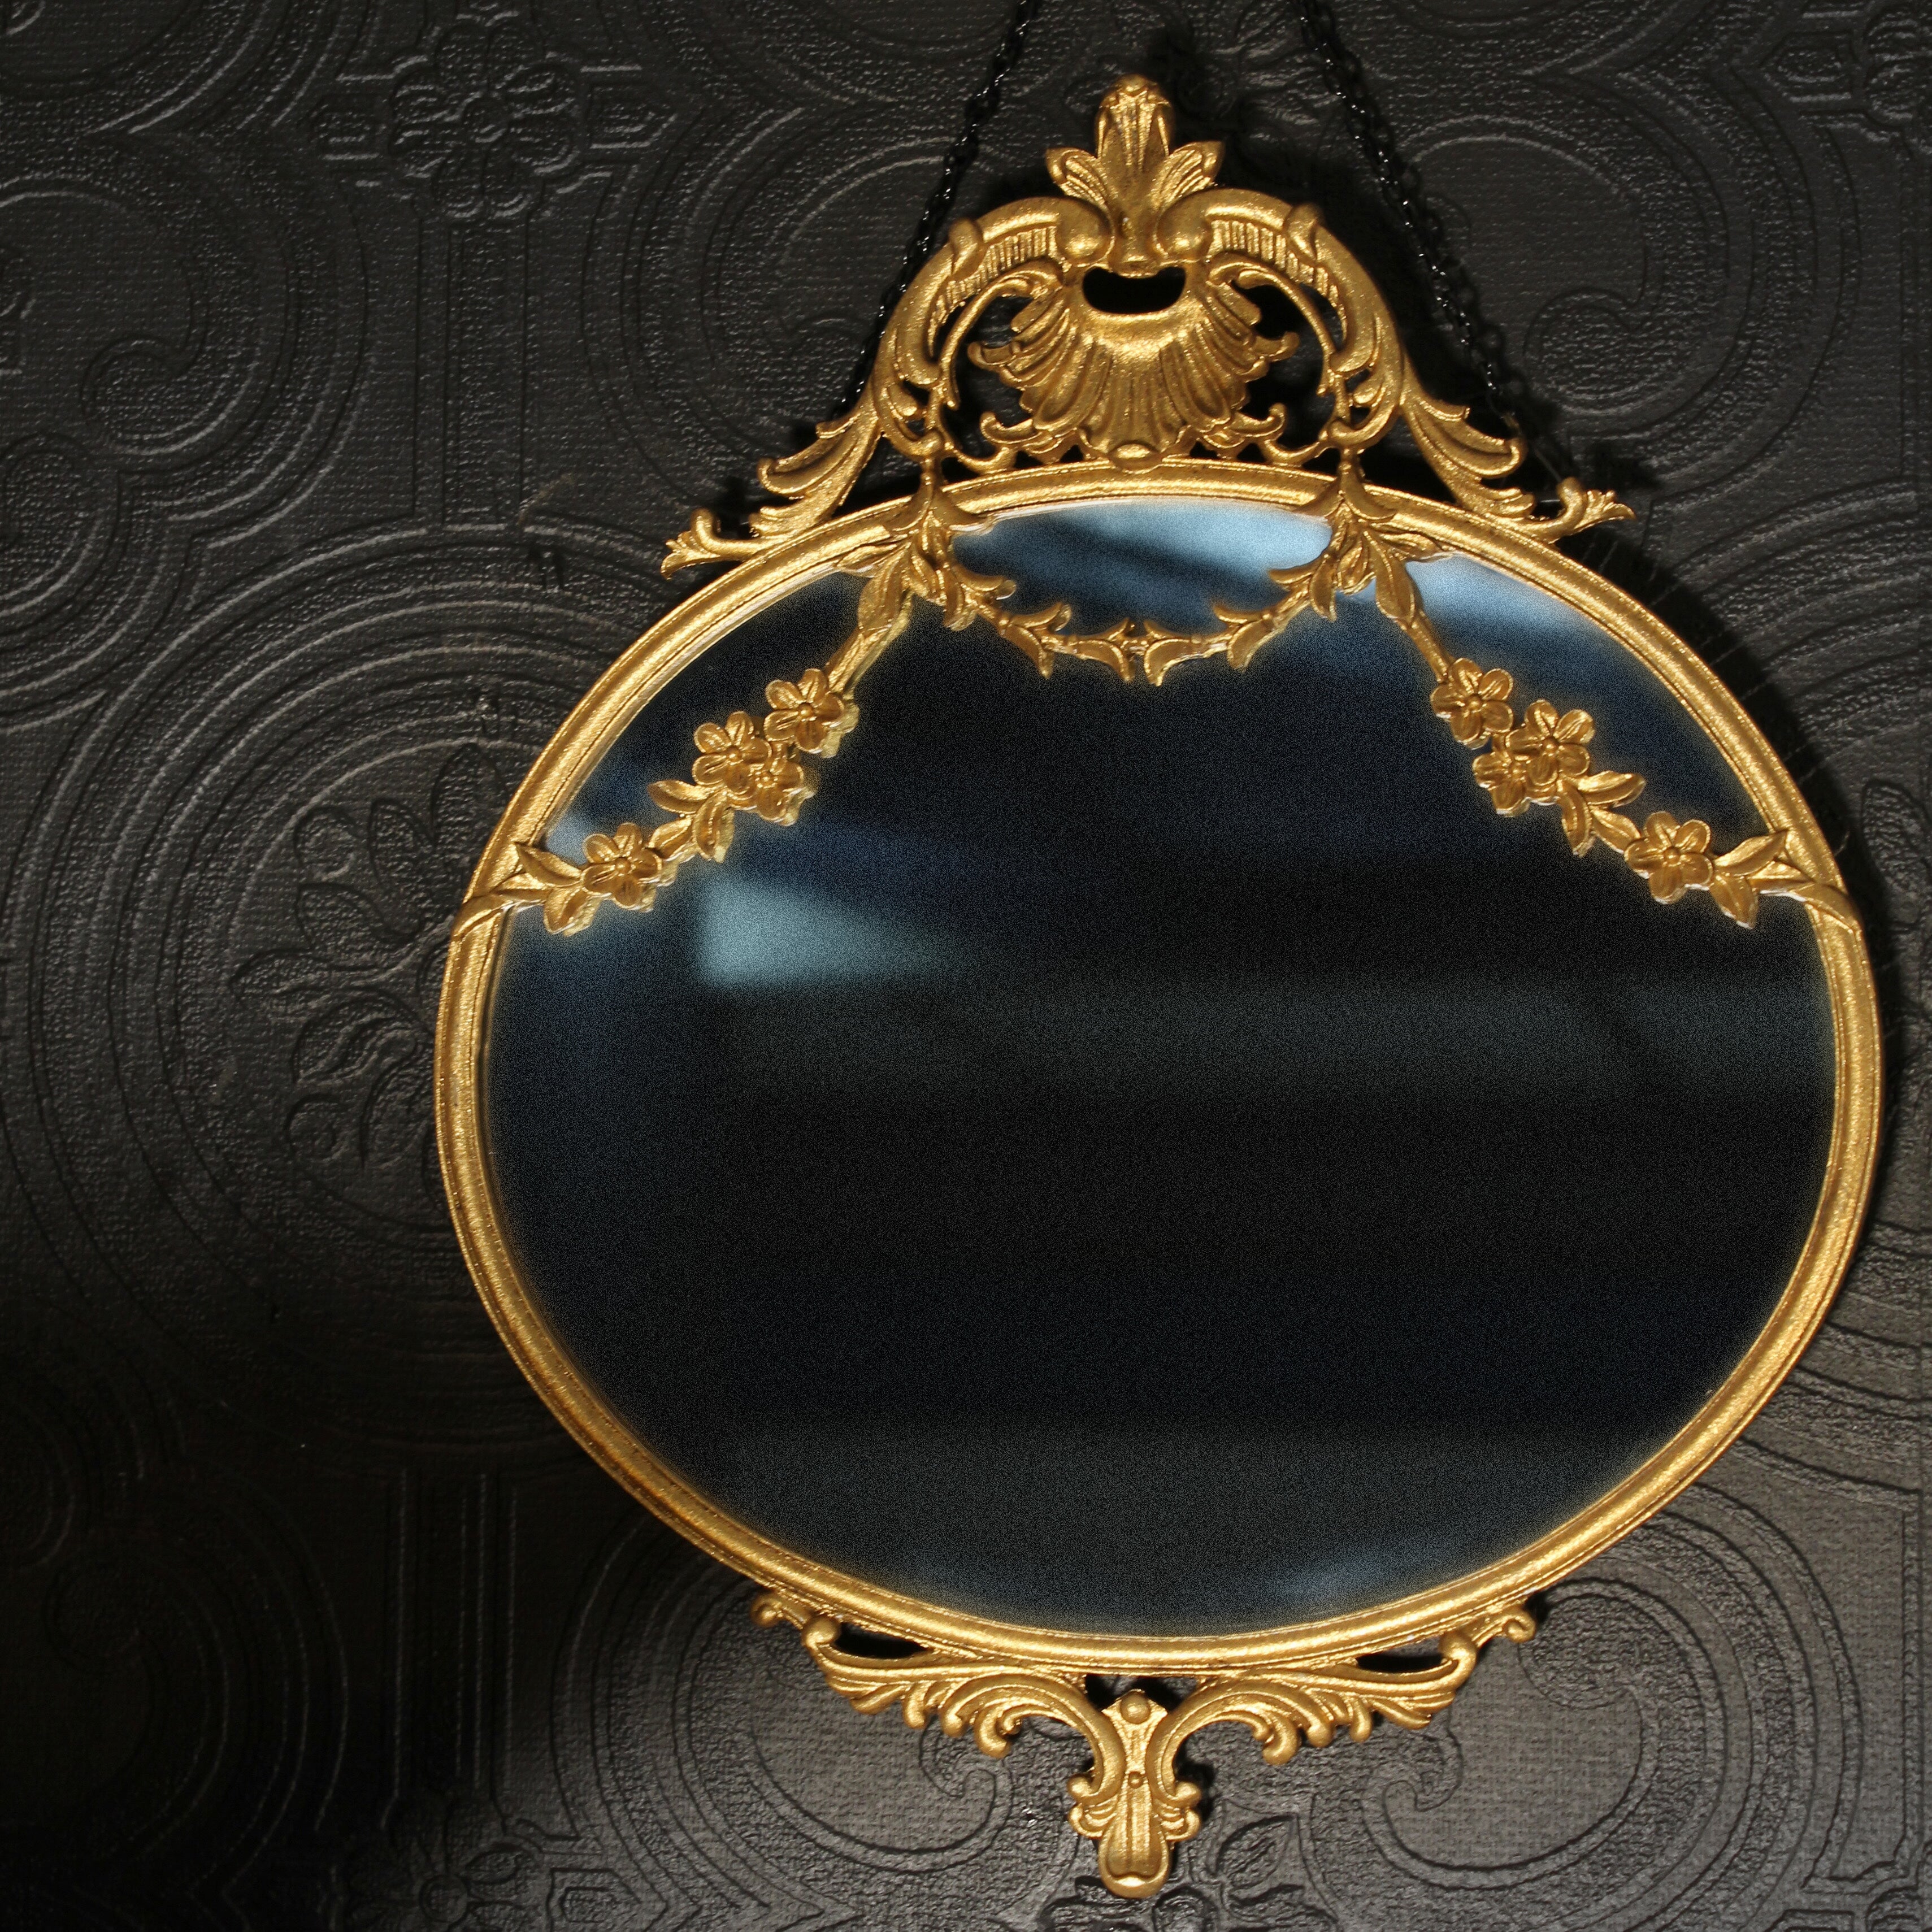 Gold oval baroque ornate mirror by The Blackened Teeth - The Blackened Abode